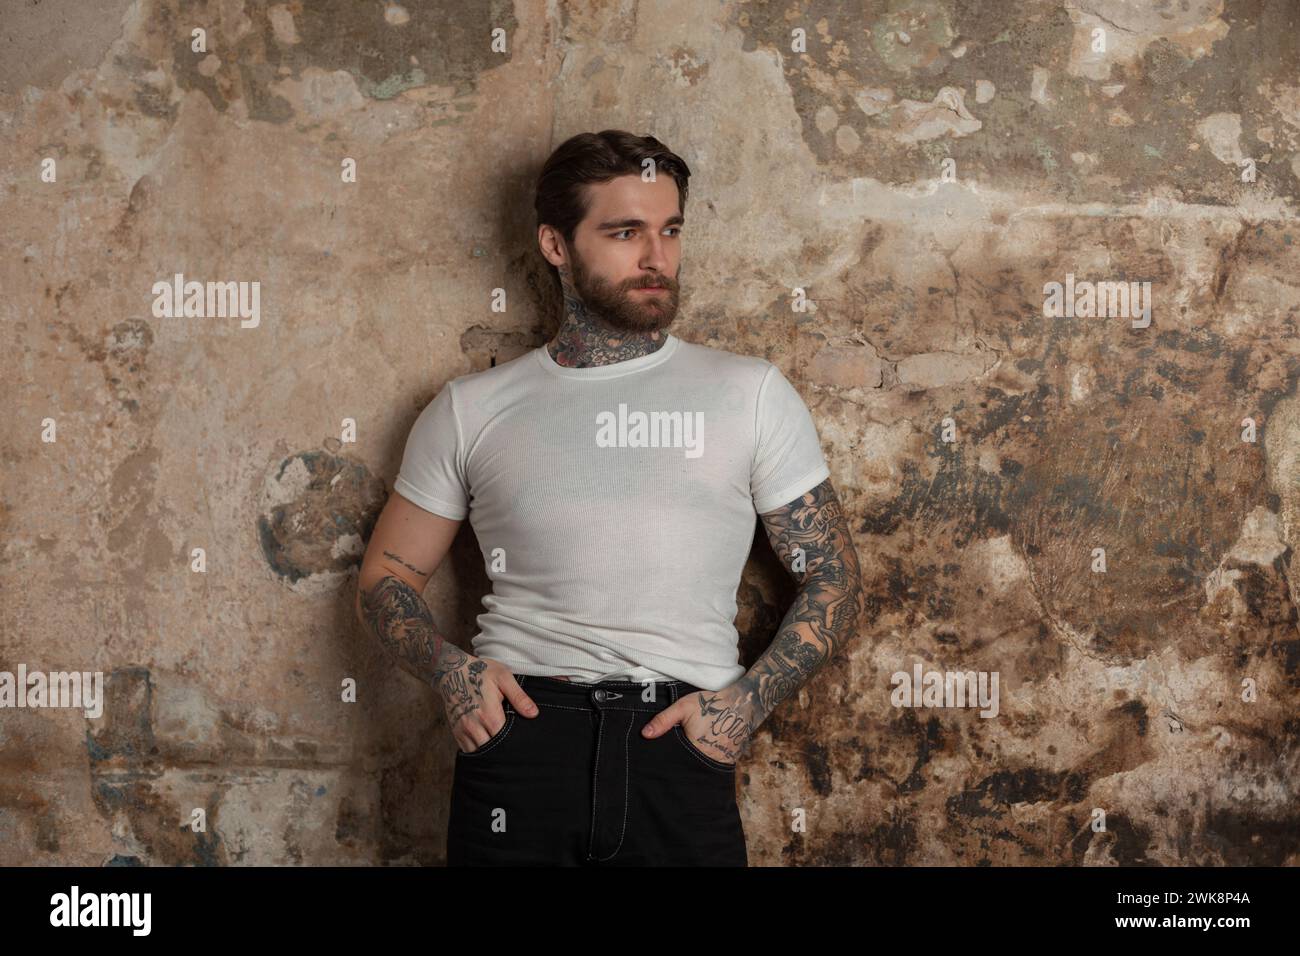 Cool Hipster Brutal Man With A Hairstyle And Beard In A Fashionable White Mock-up T-shirt With Tattoos Stands Near A Vintage Grunge Textured Wall Stock Photo